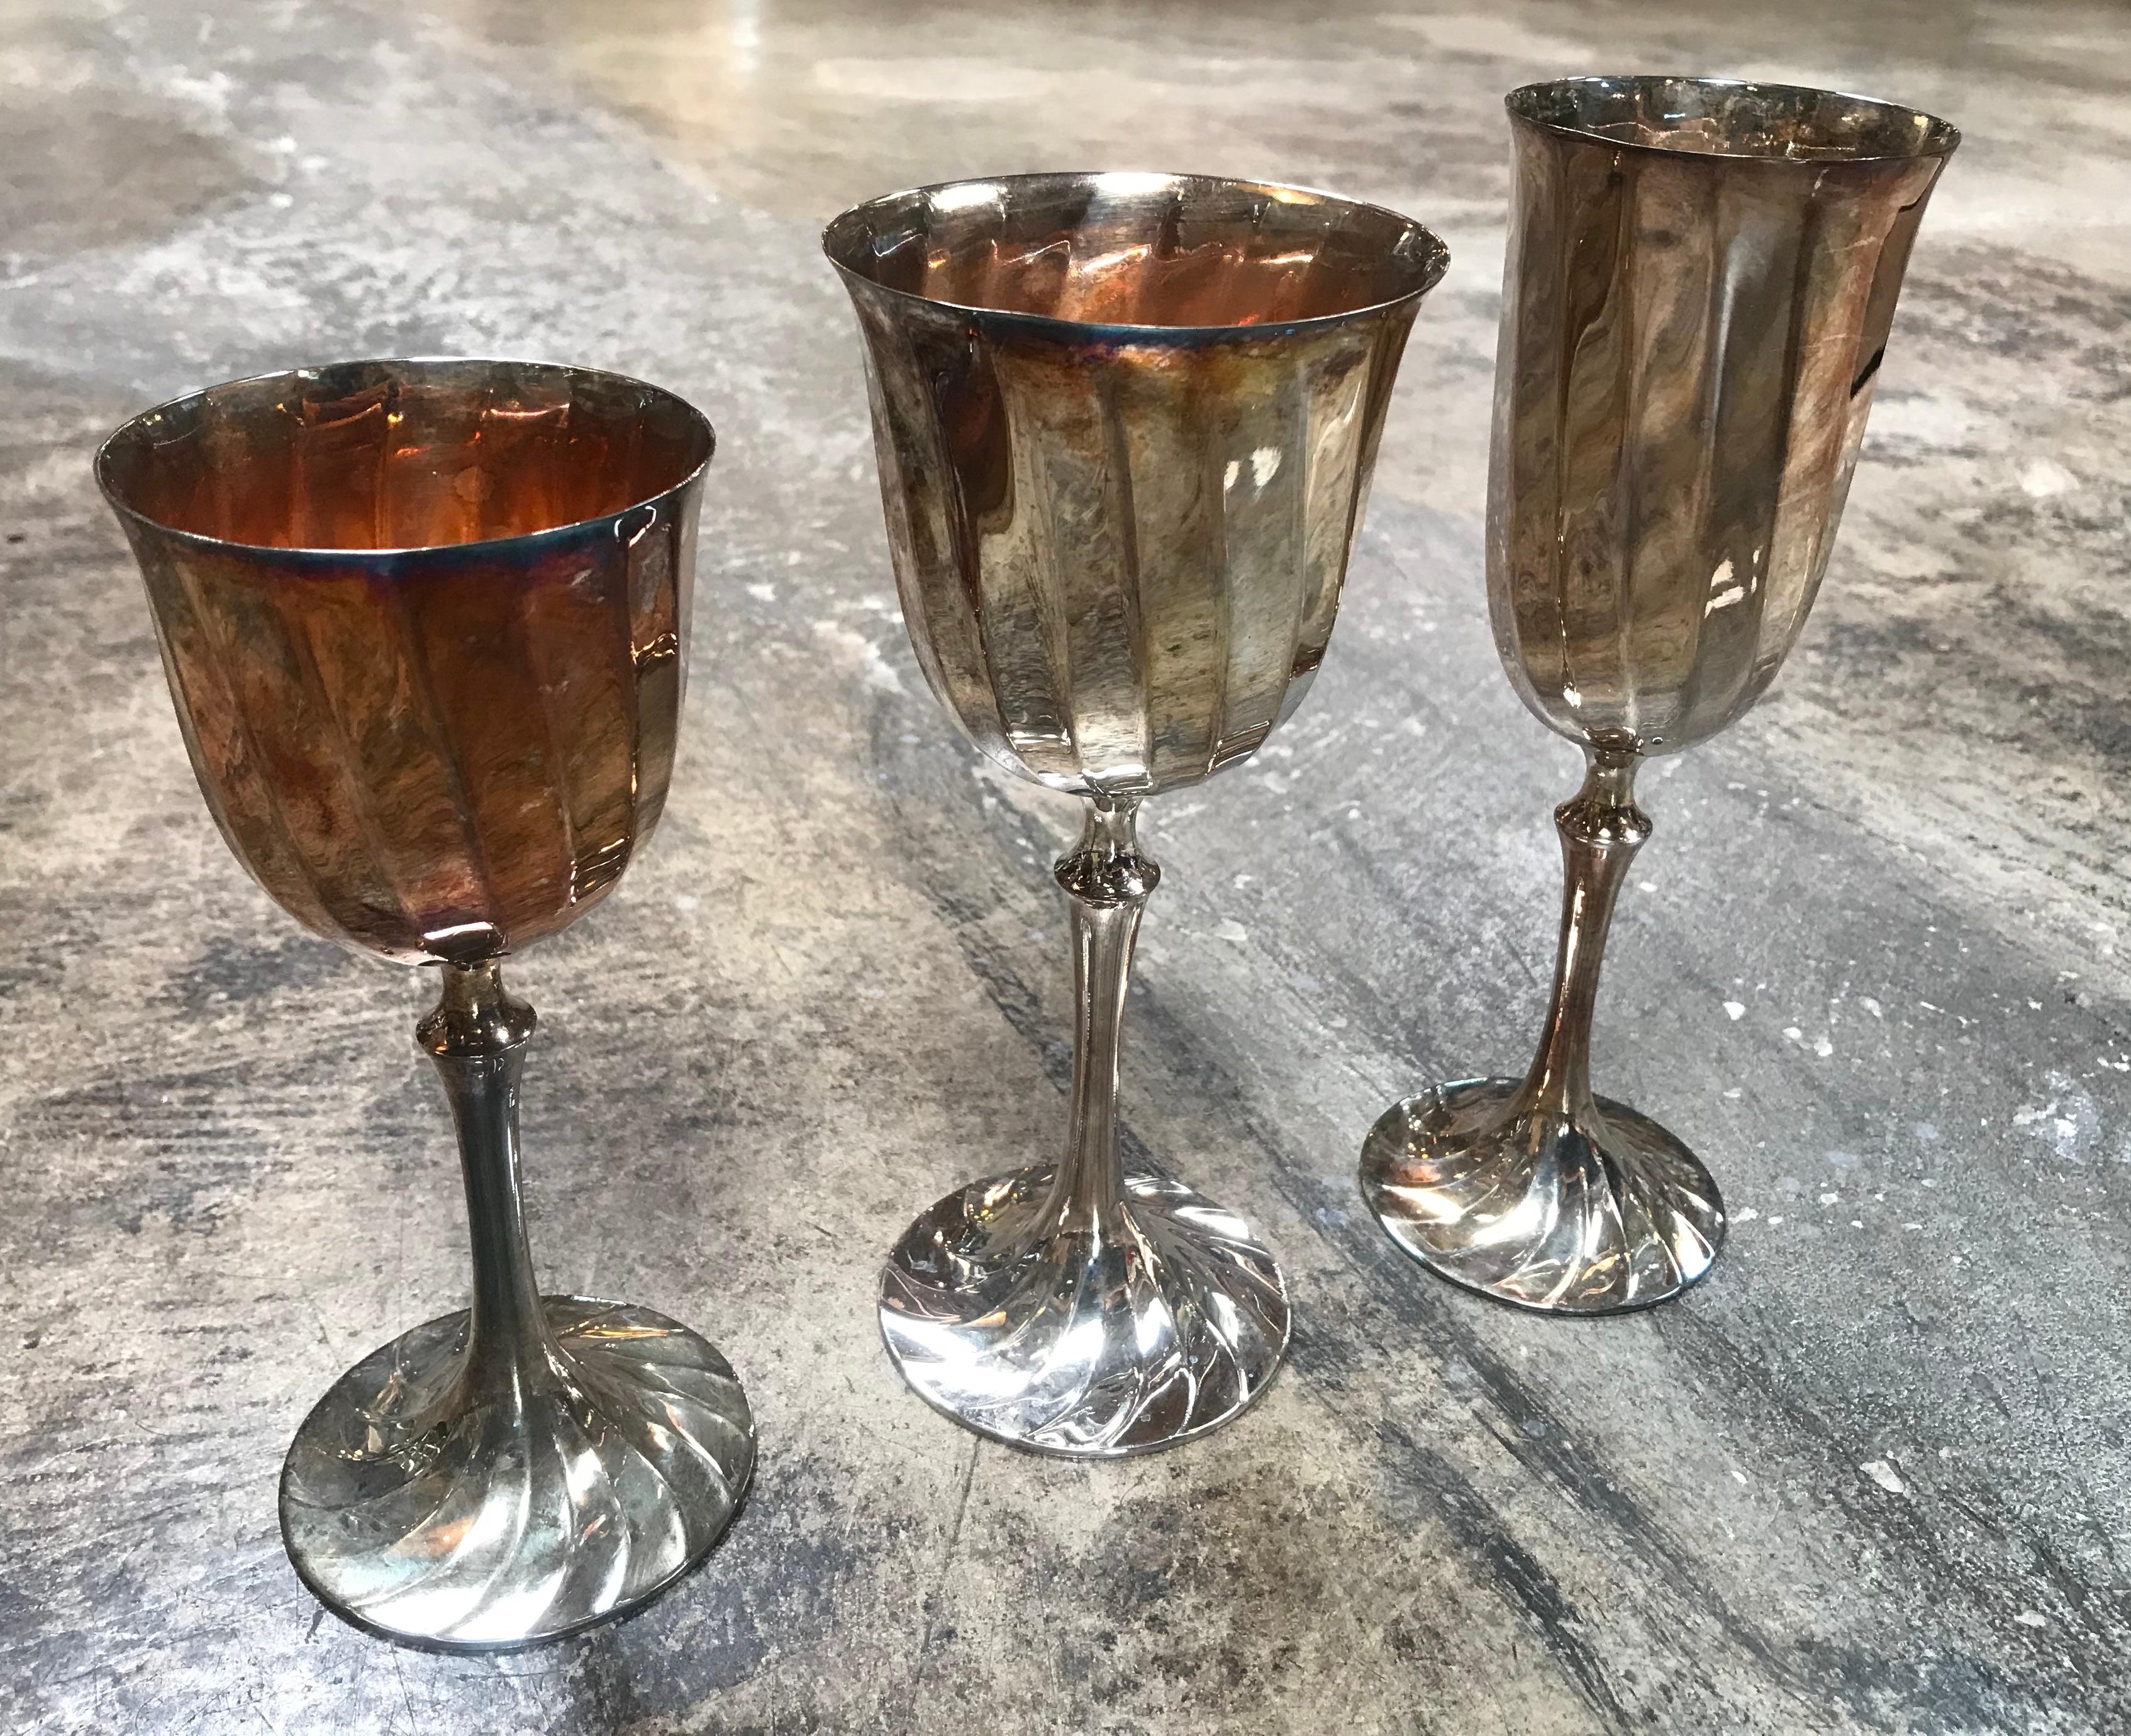 Italian Midcentury Glassware Set for 10 Silver-Plated Glasses, Italy, 1950s